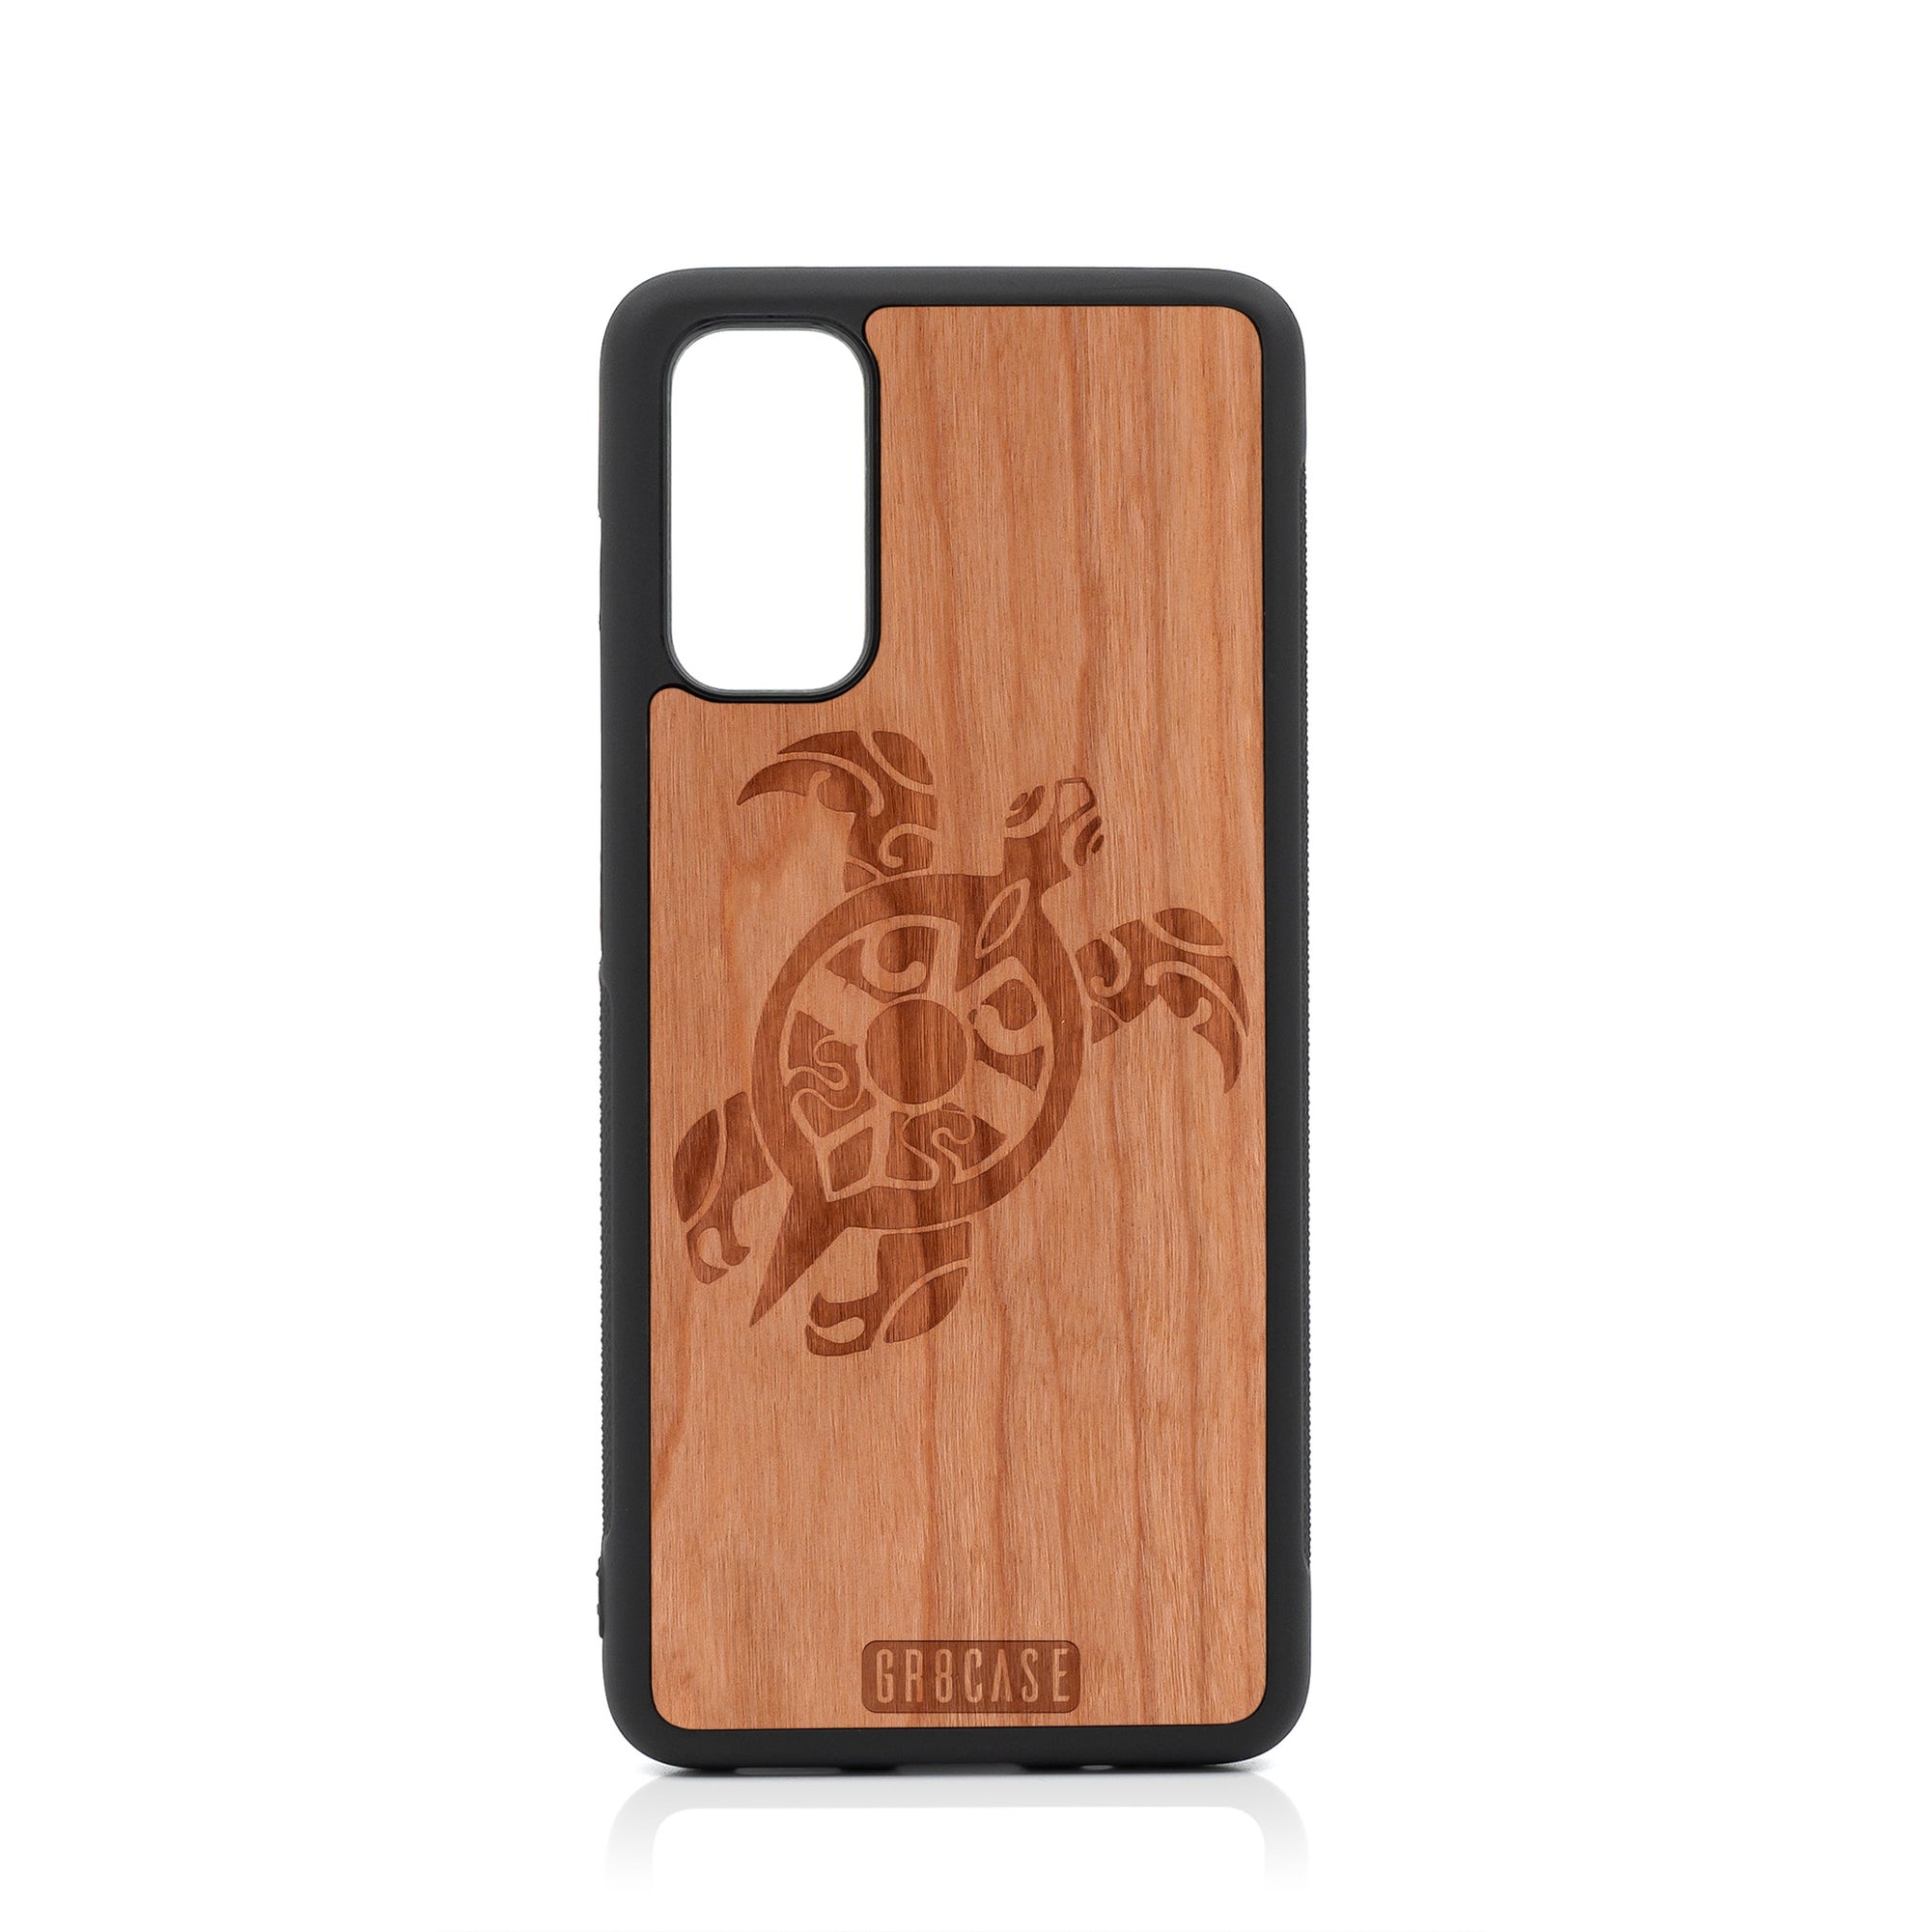 Turtle Design Wood Case For Samsung Galaxy S20